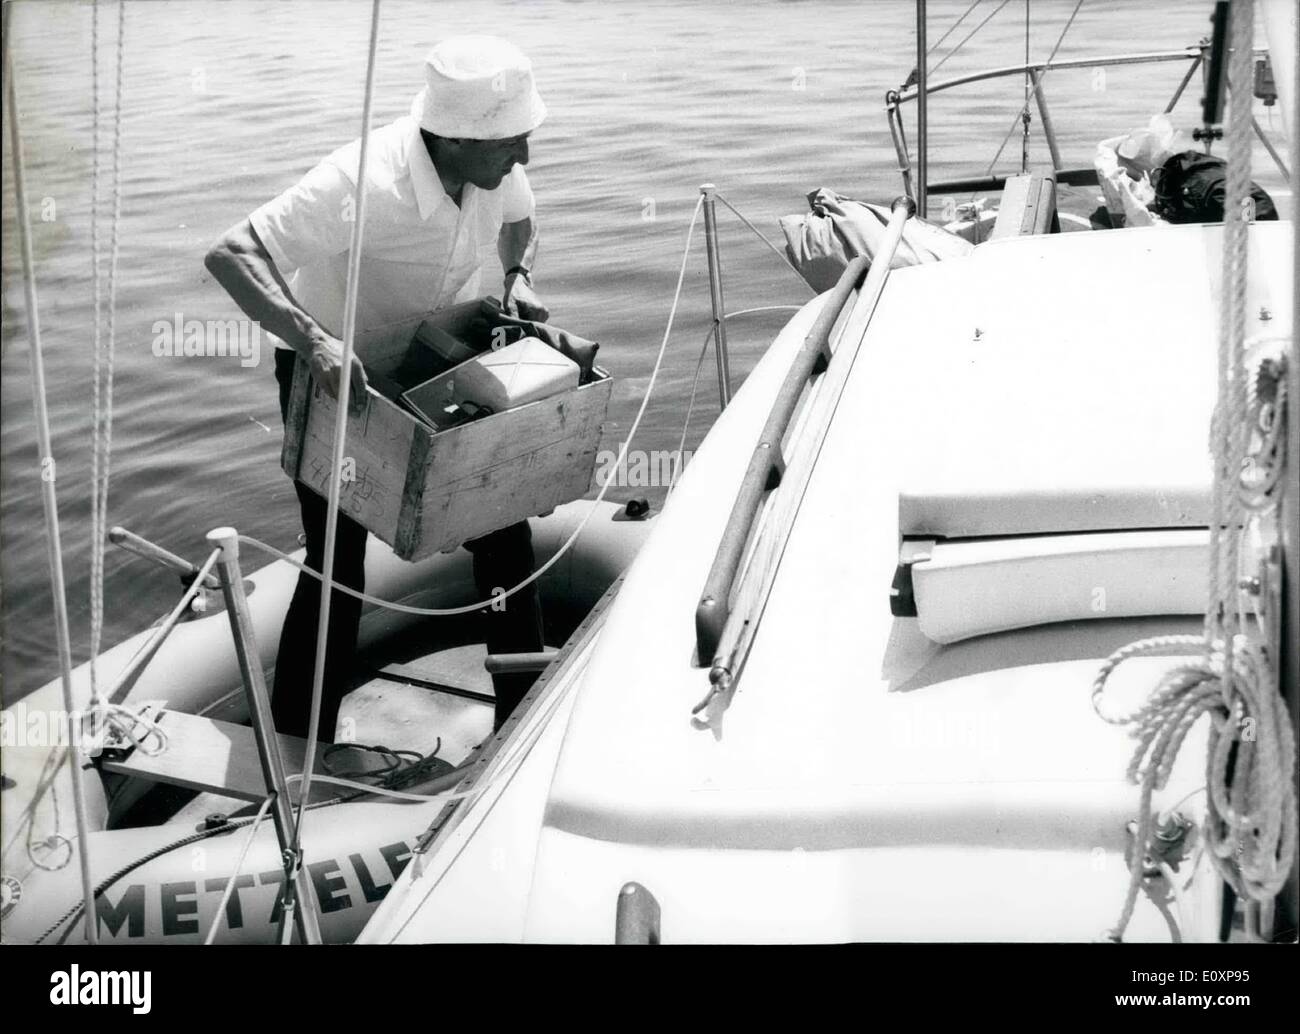 Jul. 07, 1967 - For a Trip around the World: Will Rollo Gebhard start in about 4 weeks. In St. Margherita in teh Mediterranina Sea ( near Genua)the 45 years old actor and dealer in records from Garmisch, who had already caused a sensation three years ago when he crossed the Atlantic in his ''nut-shell'' in a record time of thirty days, will put out to sea. With his ''Solveig III'', a 7.25 m long and 2,30 m broad glass-fibre boat of the type Condor - it has an area sails of 25 cm and was built in a wharf as the Chiemsee - Gebhard will sail towards West. His route: St Stock Photo